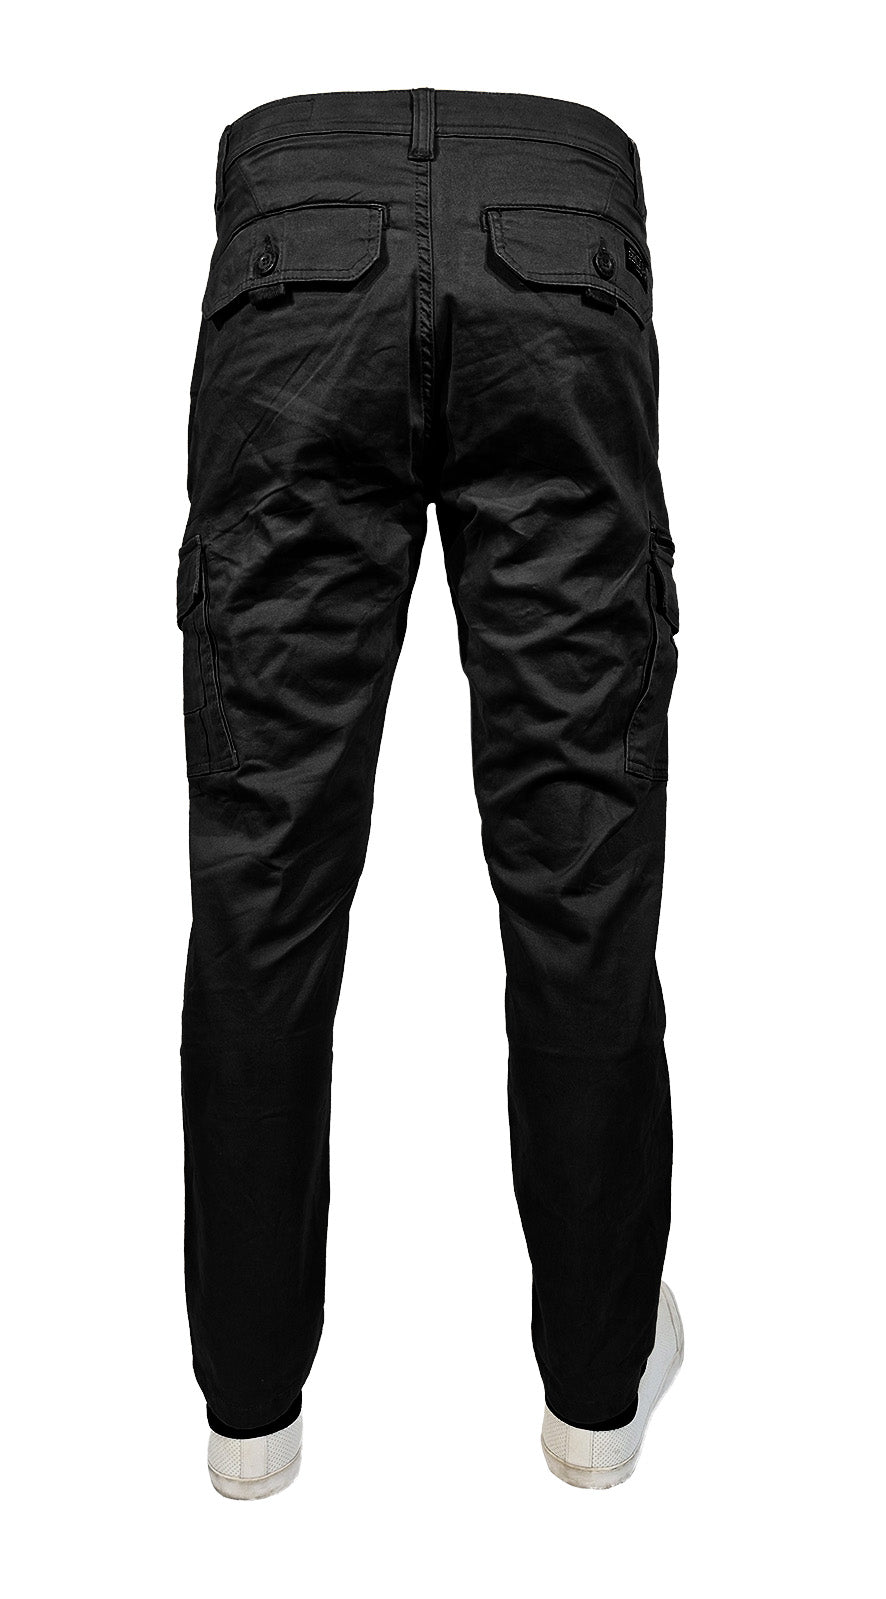 MAYFIELD Cargo pant in premium cotton twill - BLACK